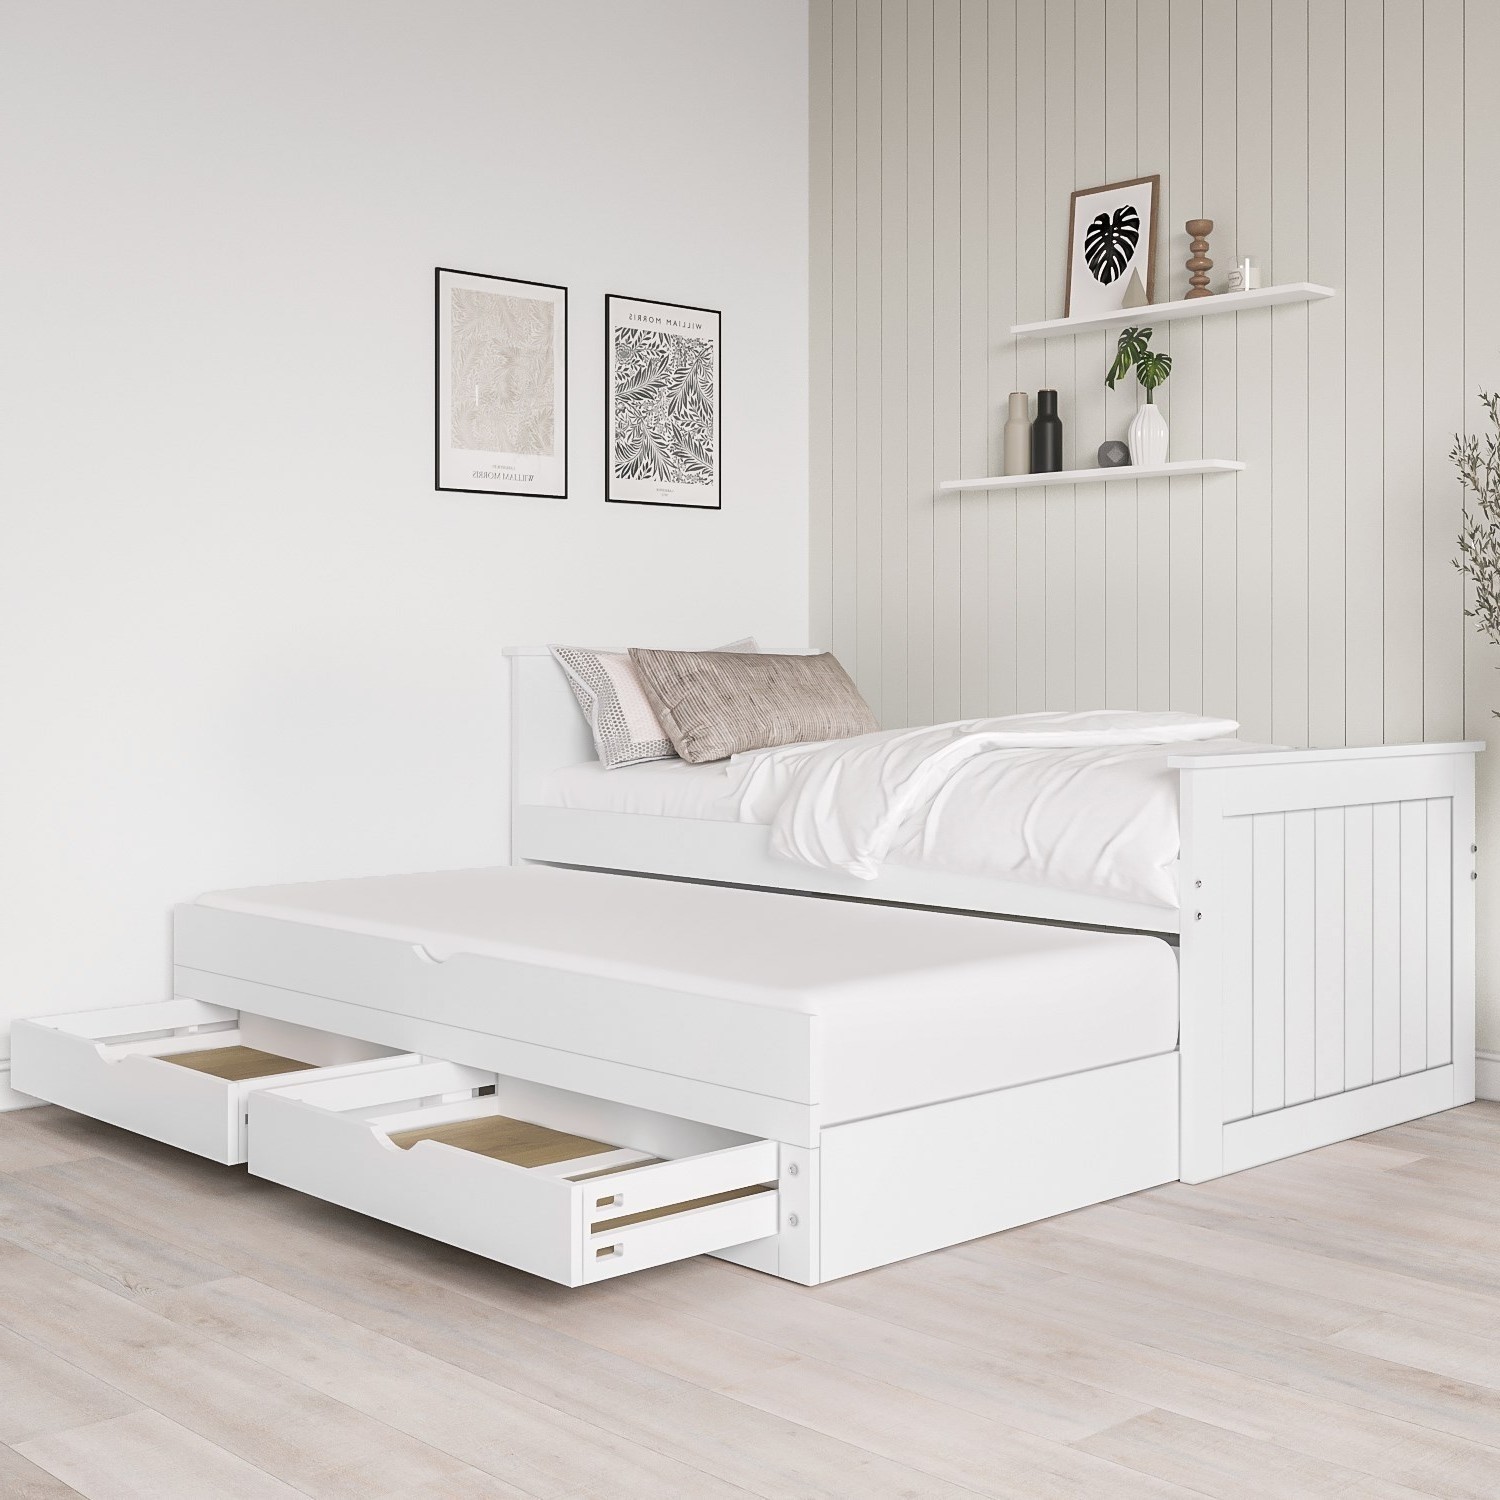 Read more about Single white wooden trundle bed with storage sander